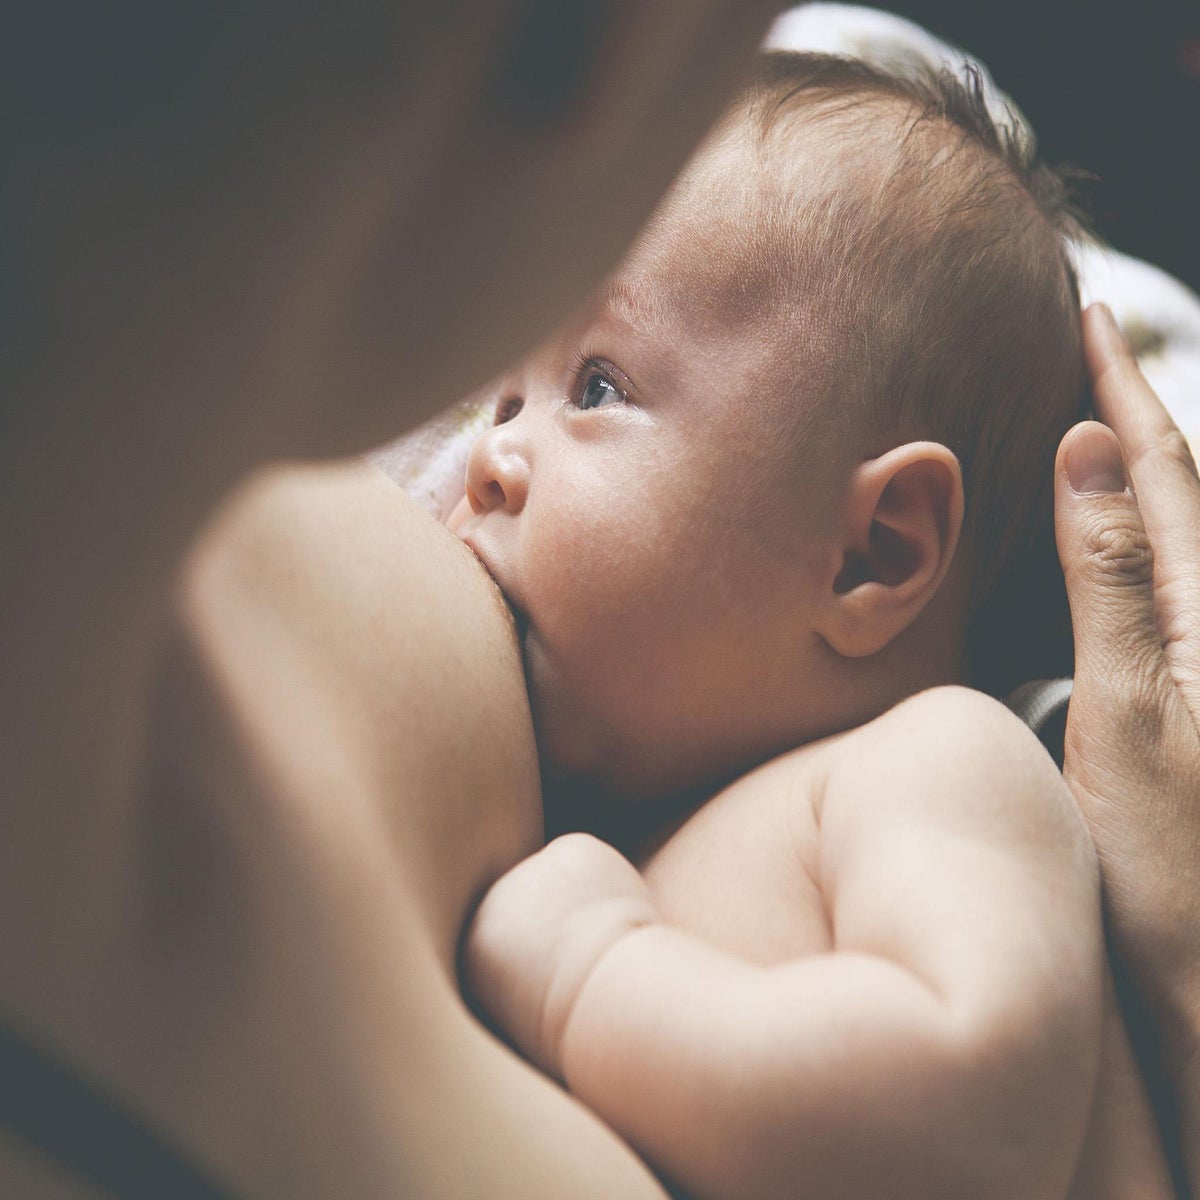 https://static.independent.co.uk/s3fs-public/thumbnails/image/2016/01/14/16/breastfeeding.jpg?width=1200&height=1200&fit=crop